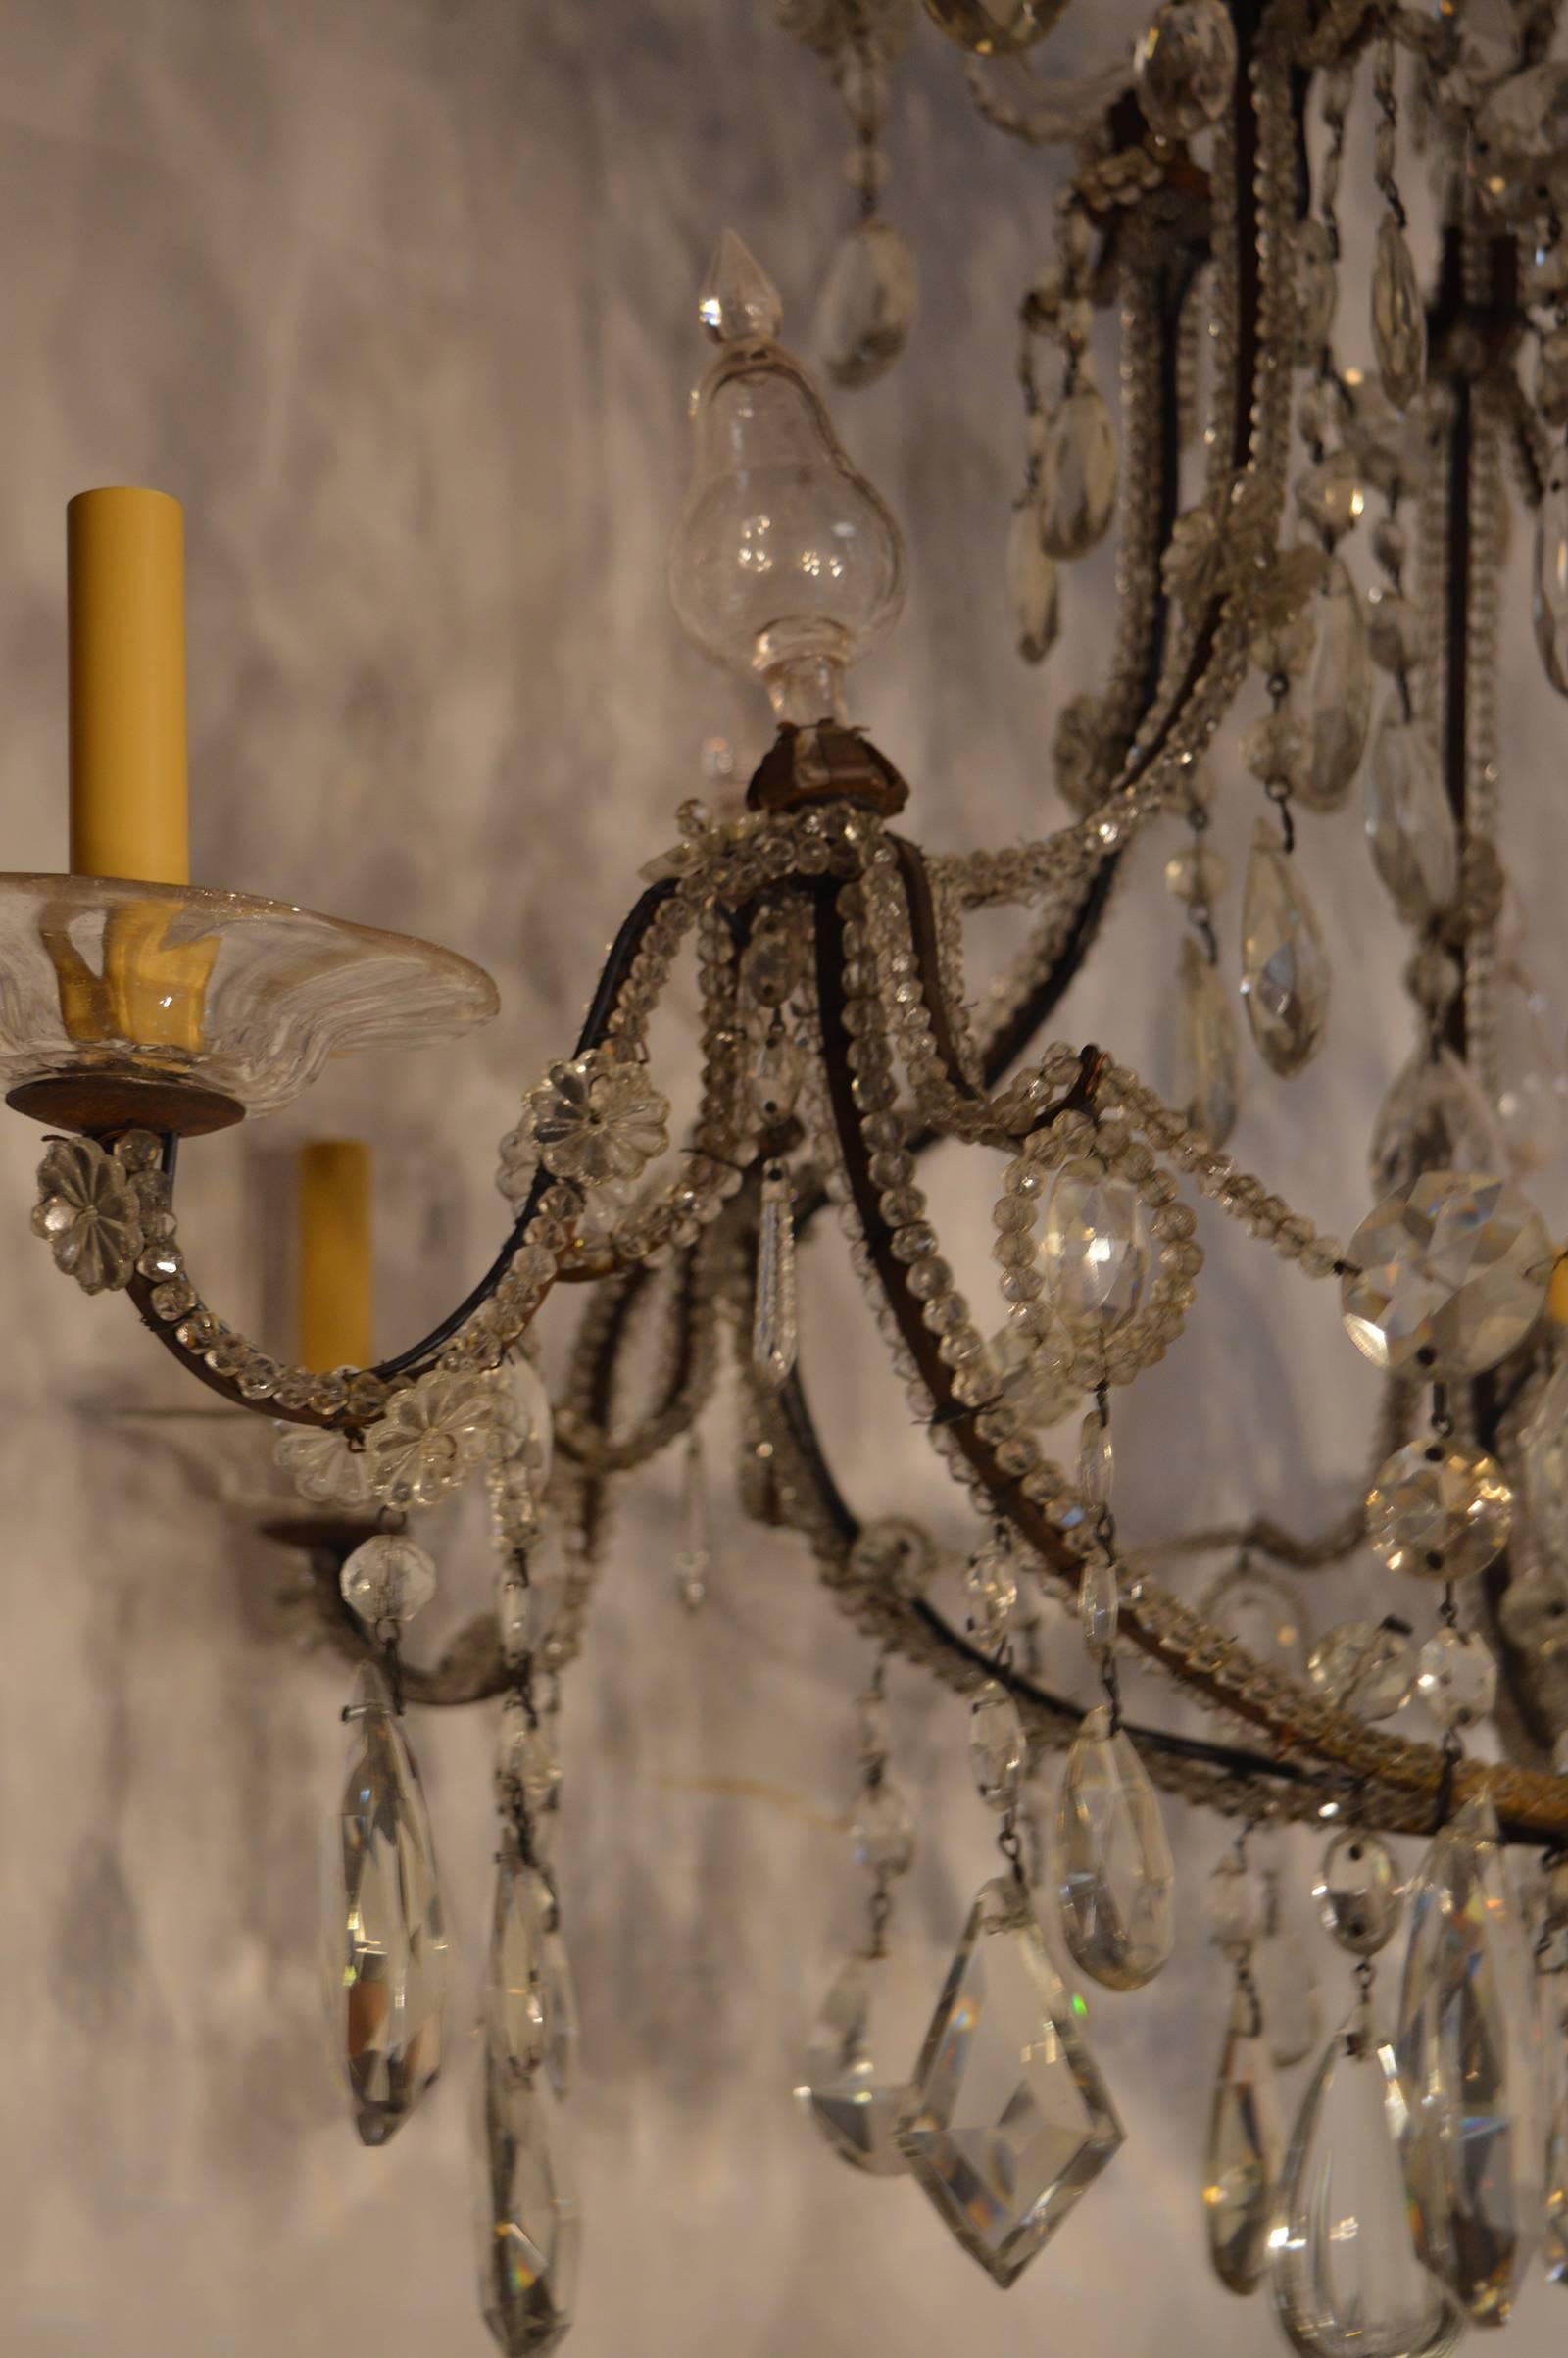 Italian crystal and Iron chandelier. Crystal beading along framework of the chandelier.